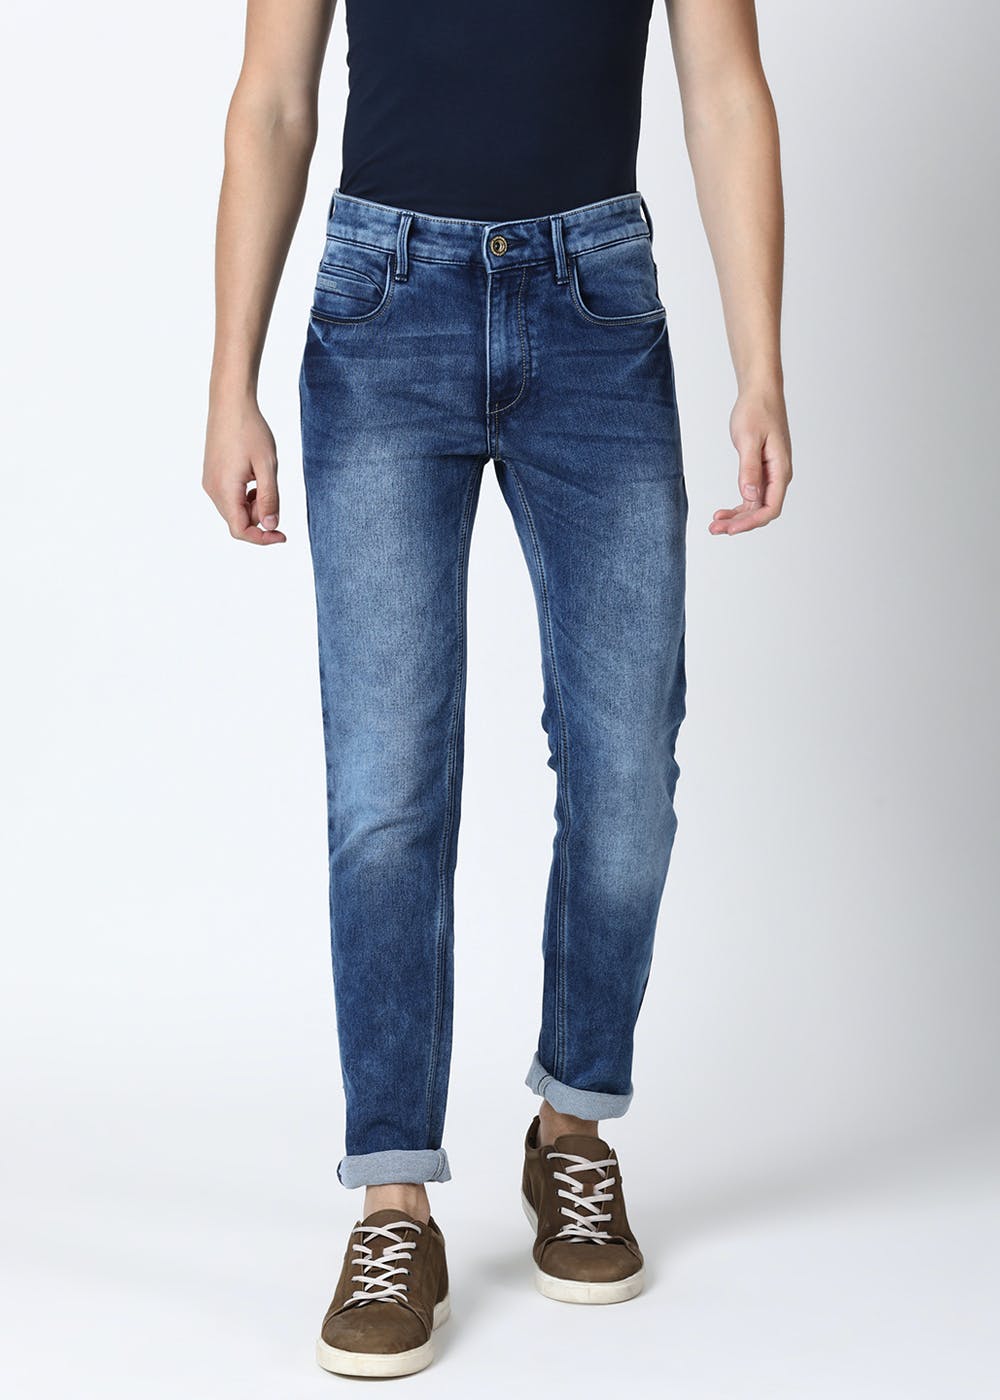 Classic Denim Washed Blue Skinny Fit Jeans